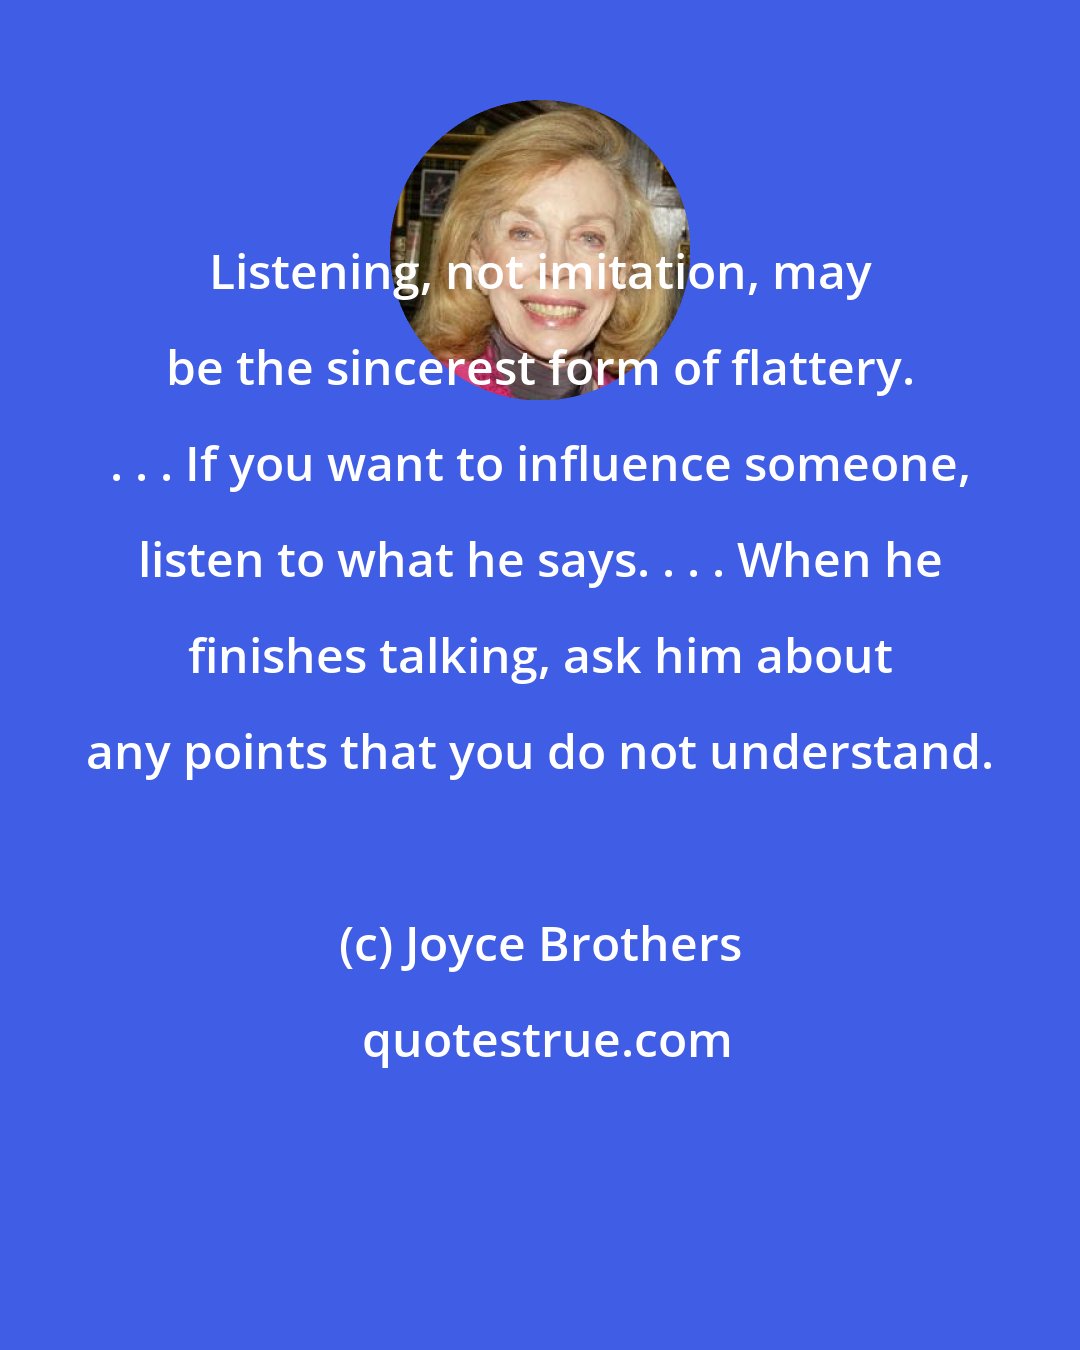 Joyce Brothers: Listening, not imitation, may be the sincerest form of flattery. . . . If you want to influence someone, listen to what he says. . . . When he finishes talking, ask him about any points that you do not understand.